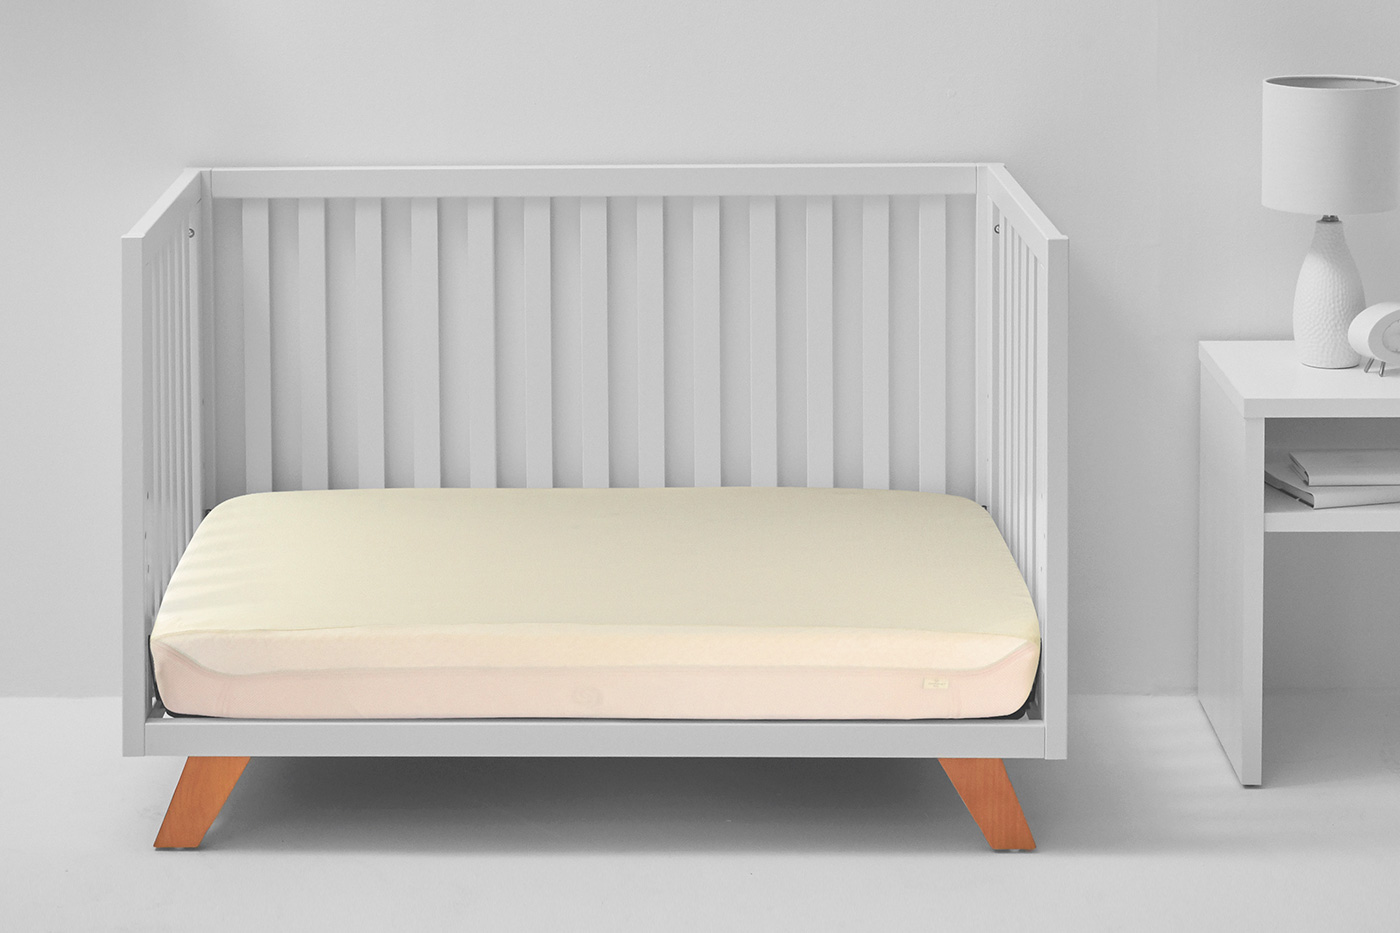 Designed with attention to every detail, so your baby will only get a comfortable sleep, and you peace of mind in perfection Bedgear Dri-Tec Performance Crib Sheets